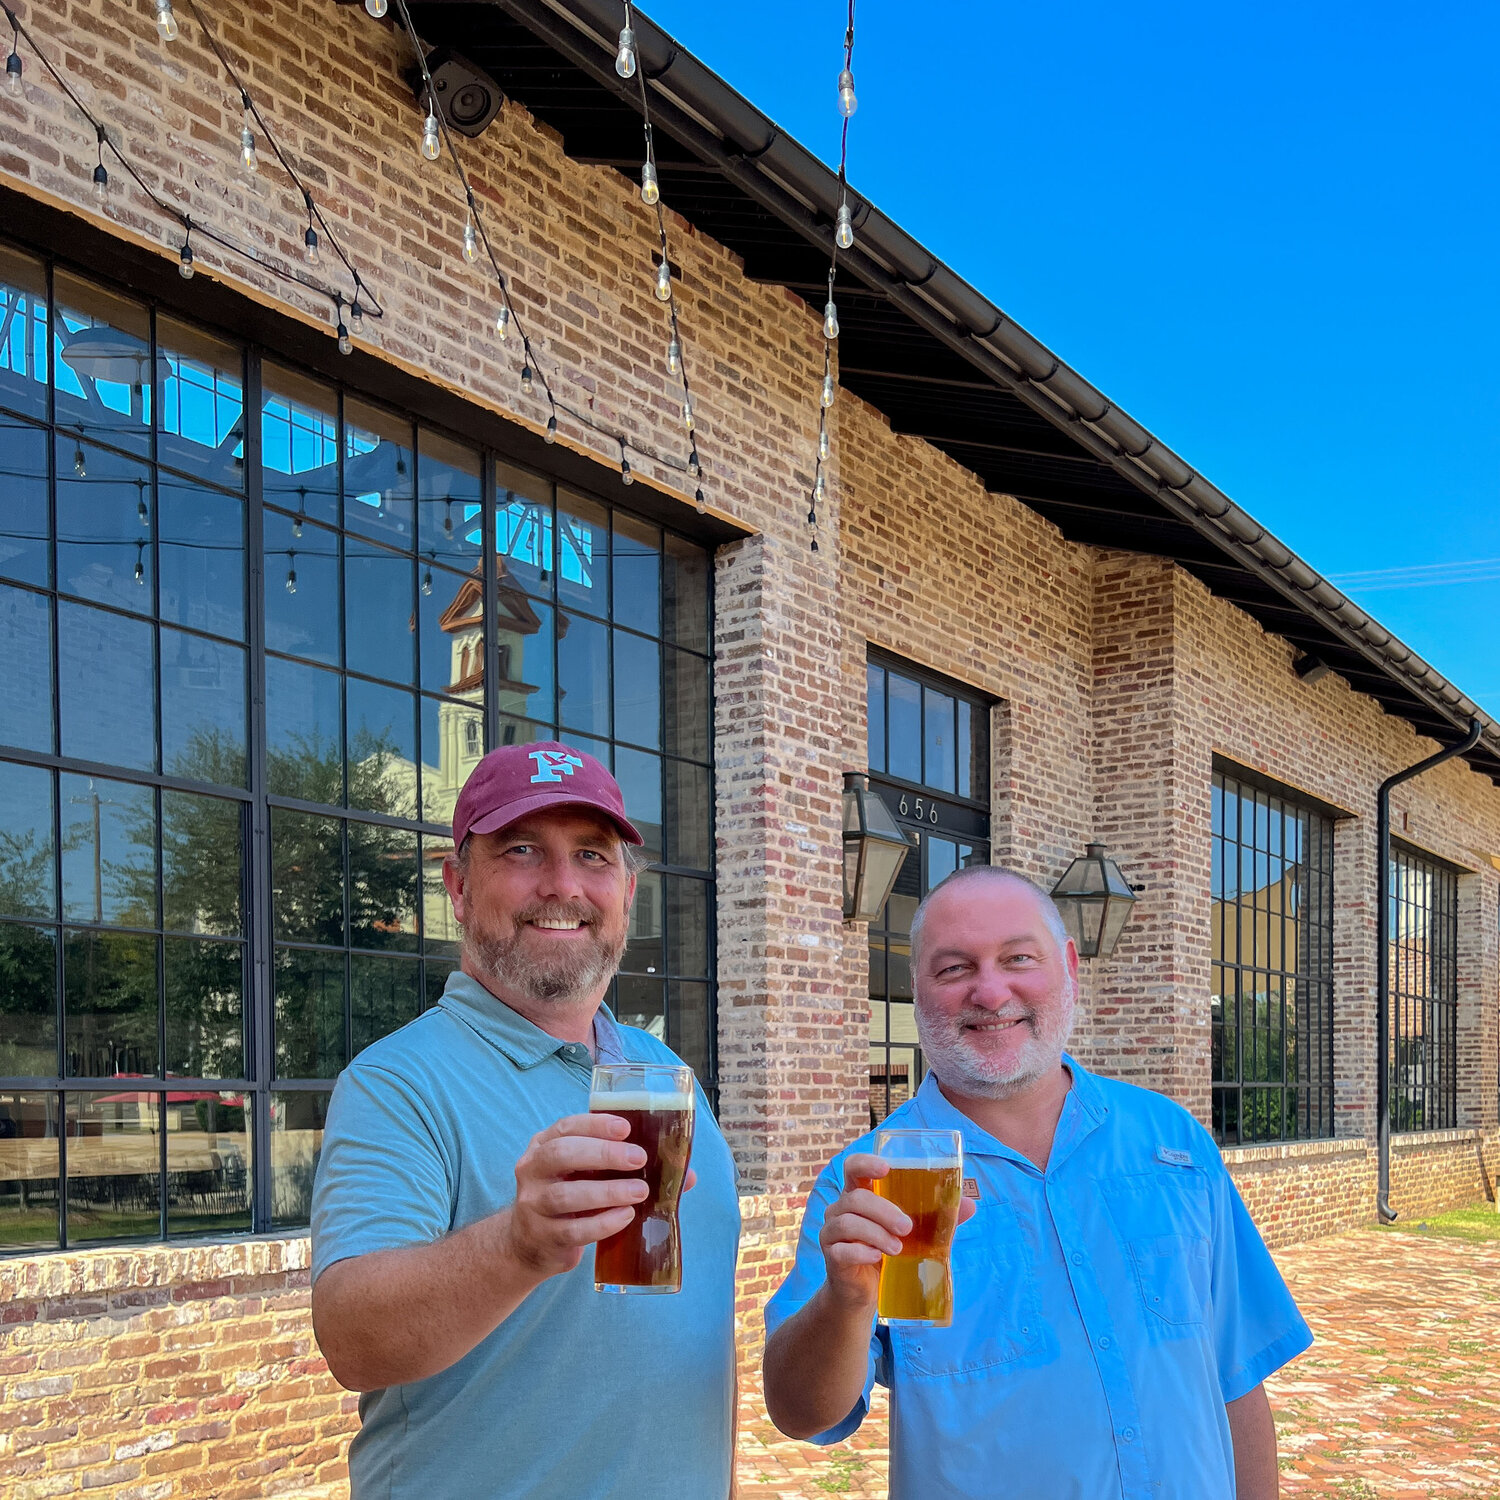 From left: Fairhope Brewing Company managing partner Jim Foley and owner Brian Kane.